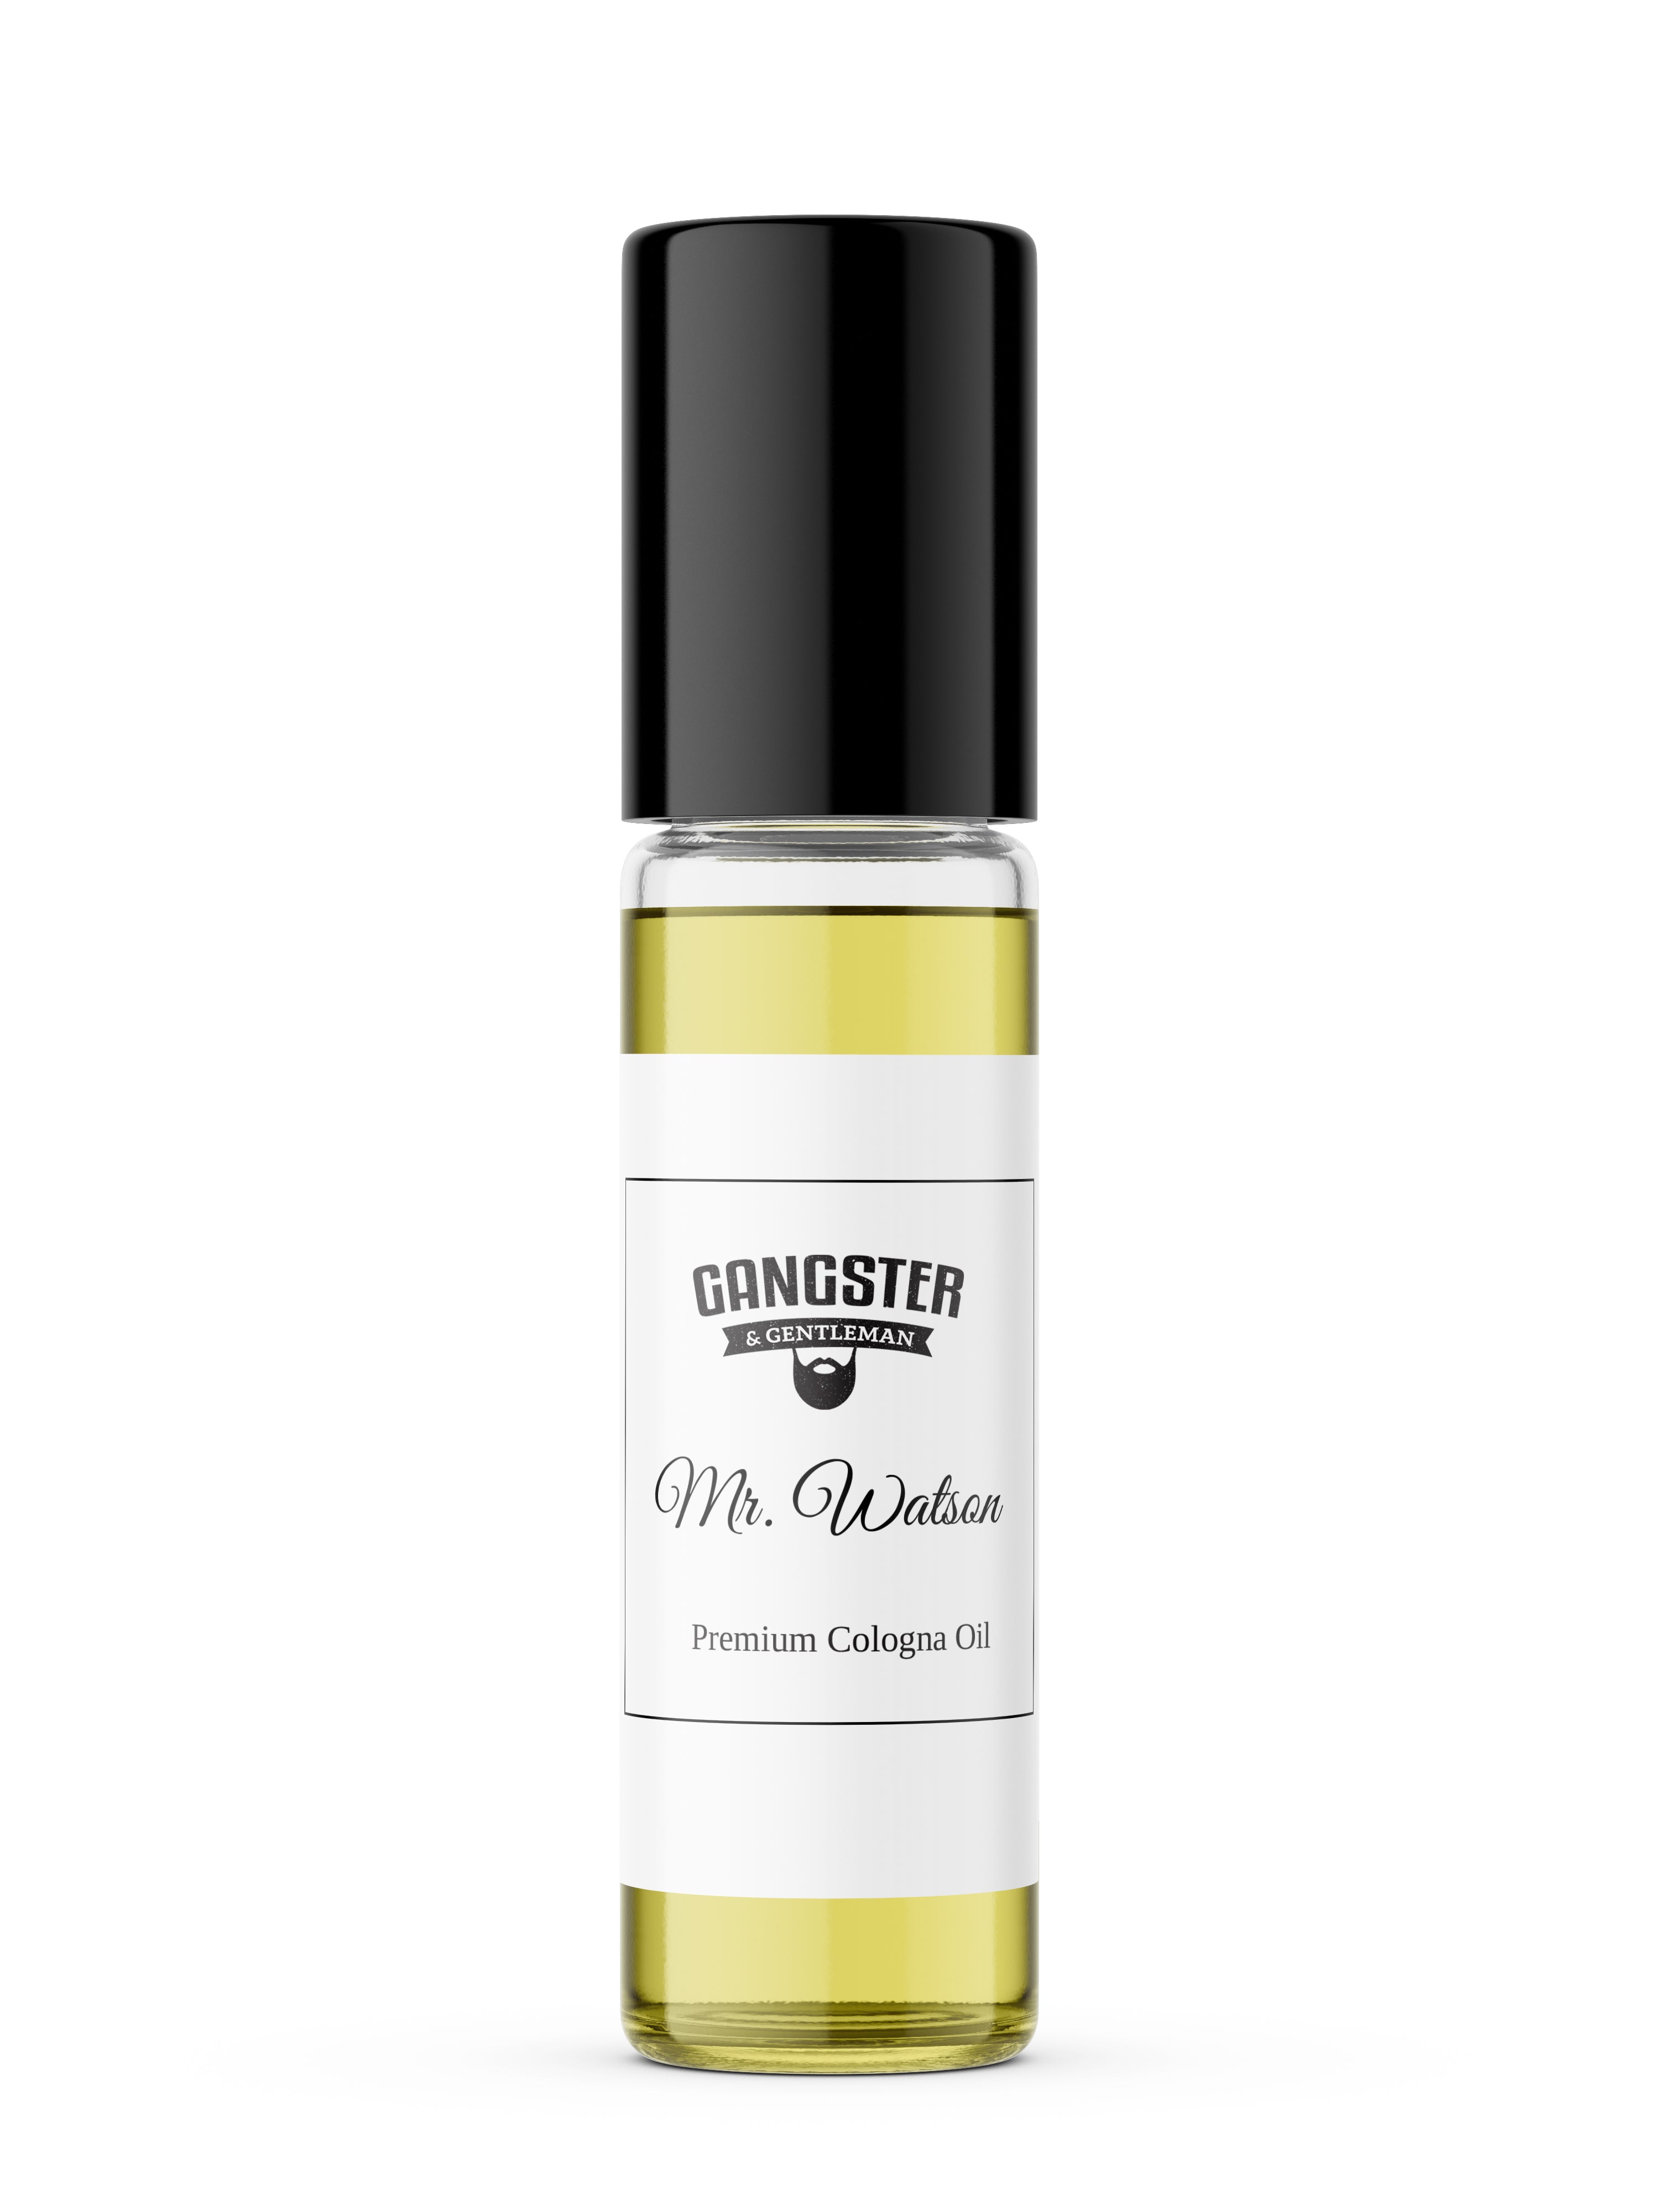 YSL L'Homme Roll On Perfume Oil - Natural Sister's / Nature's Lab Store